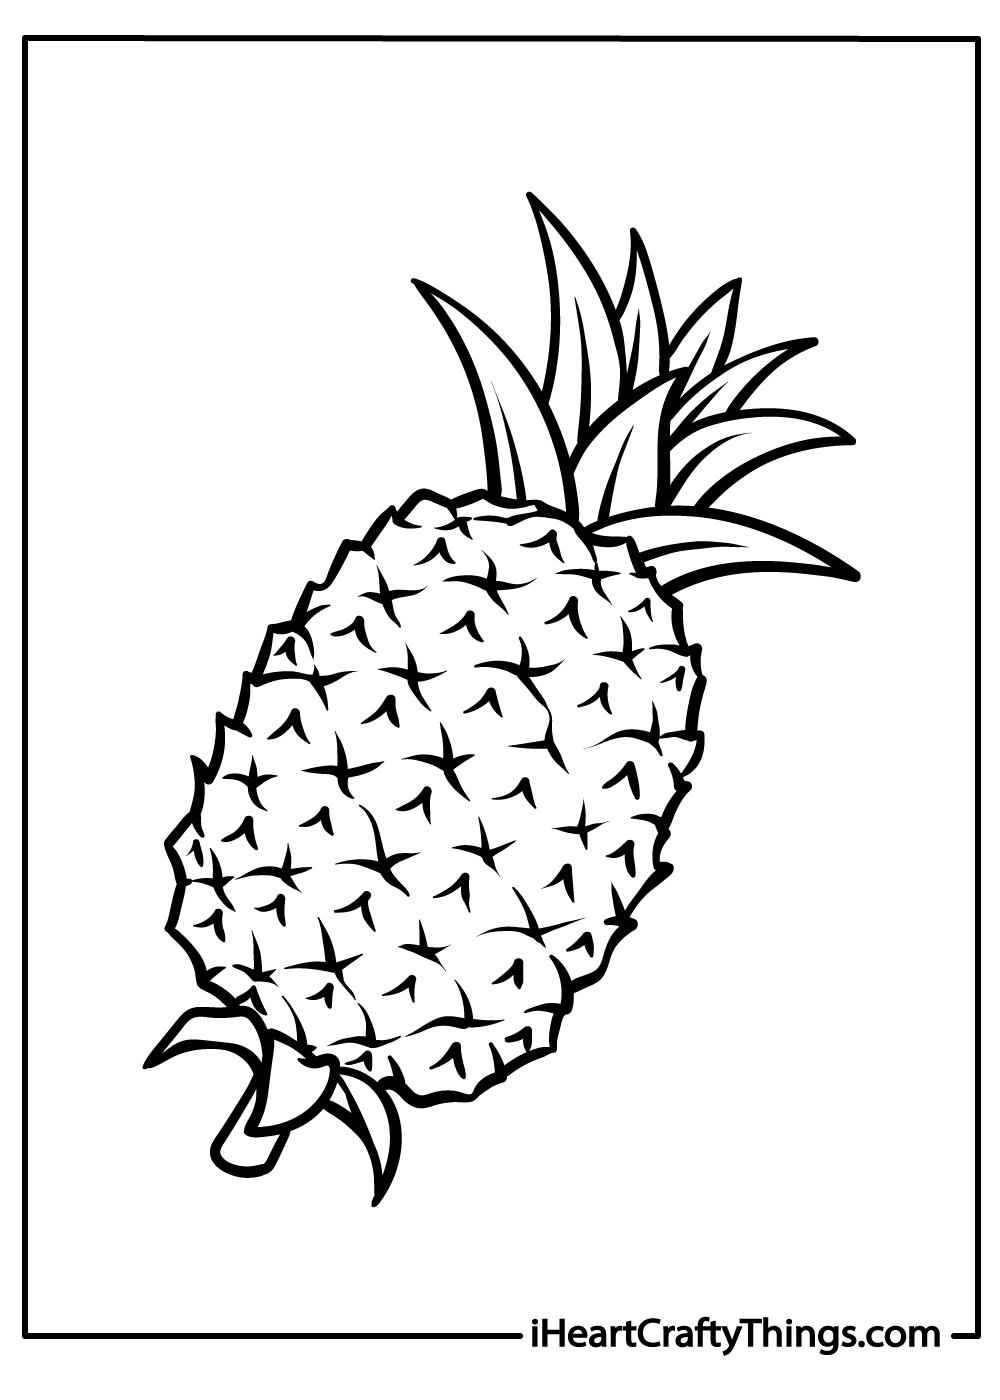 Pineapple Coloring Pages for kindergarten